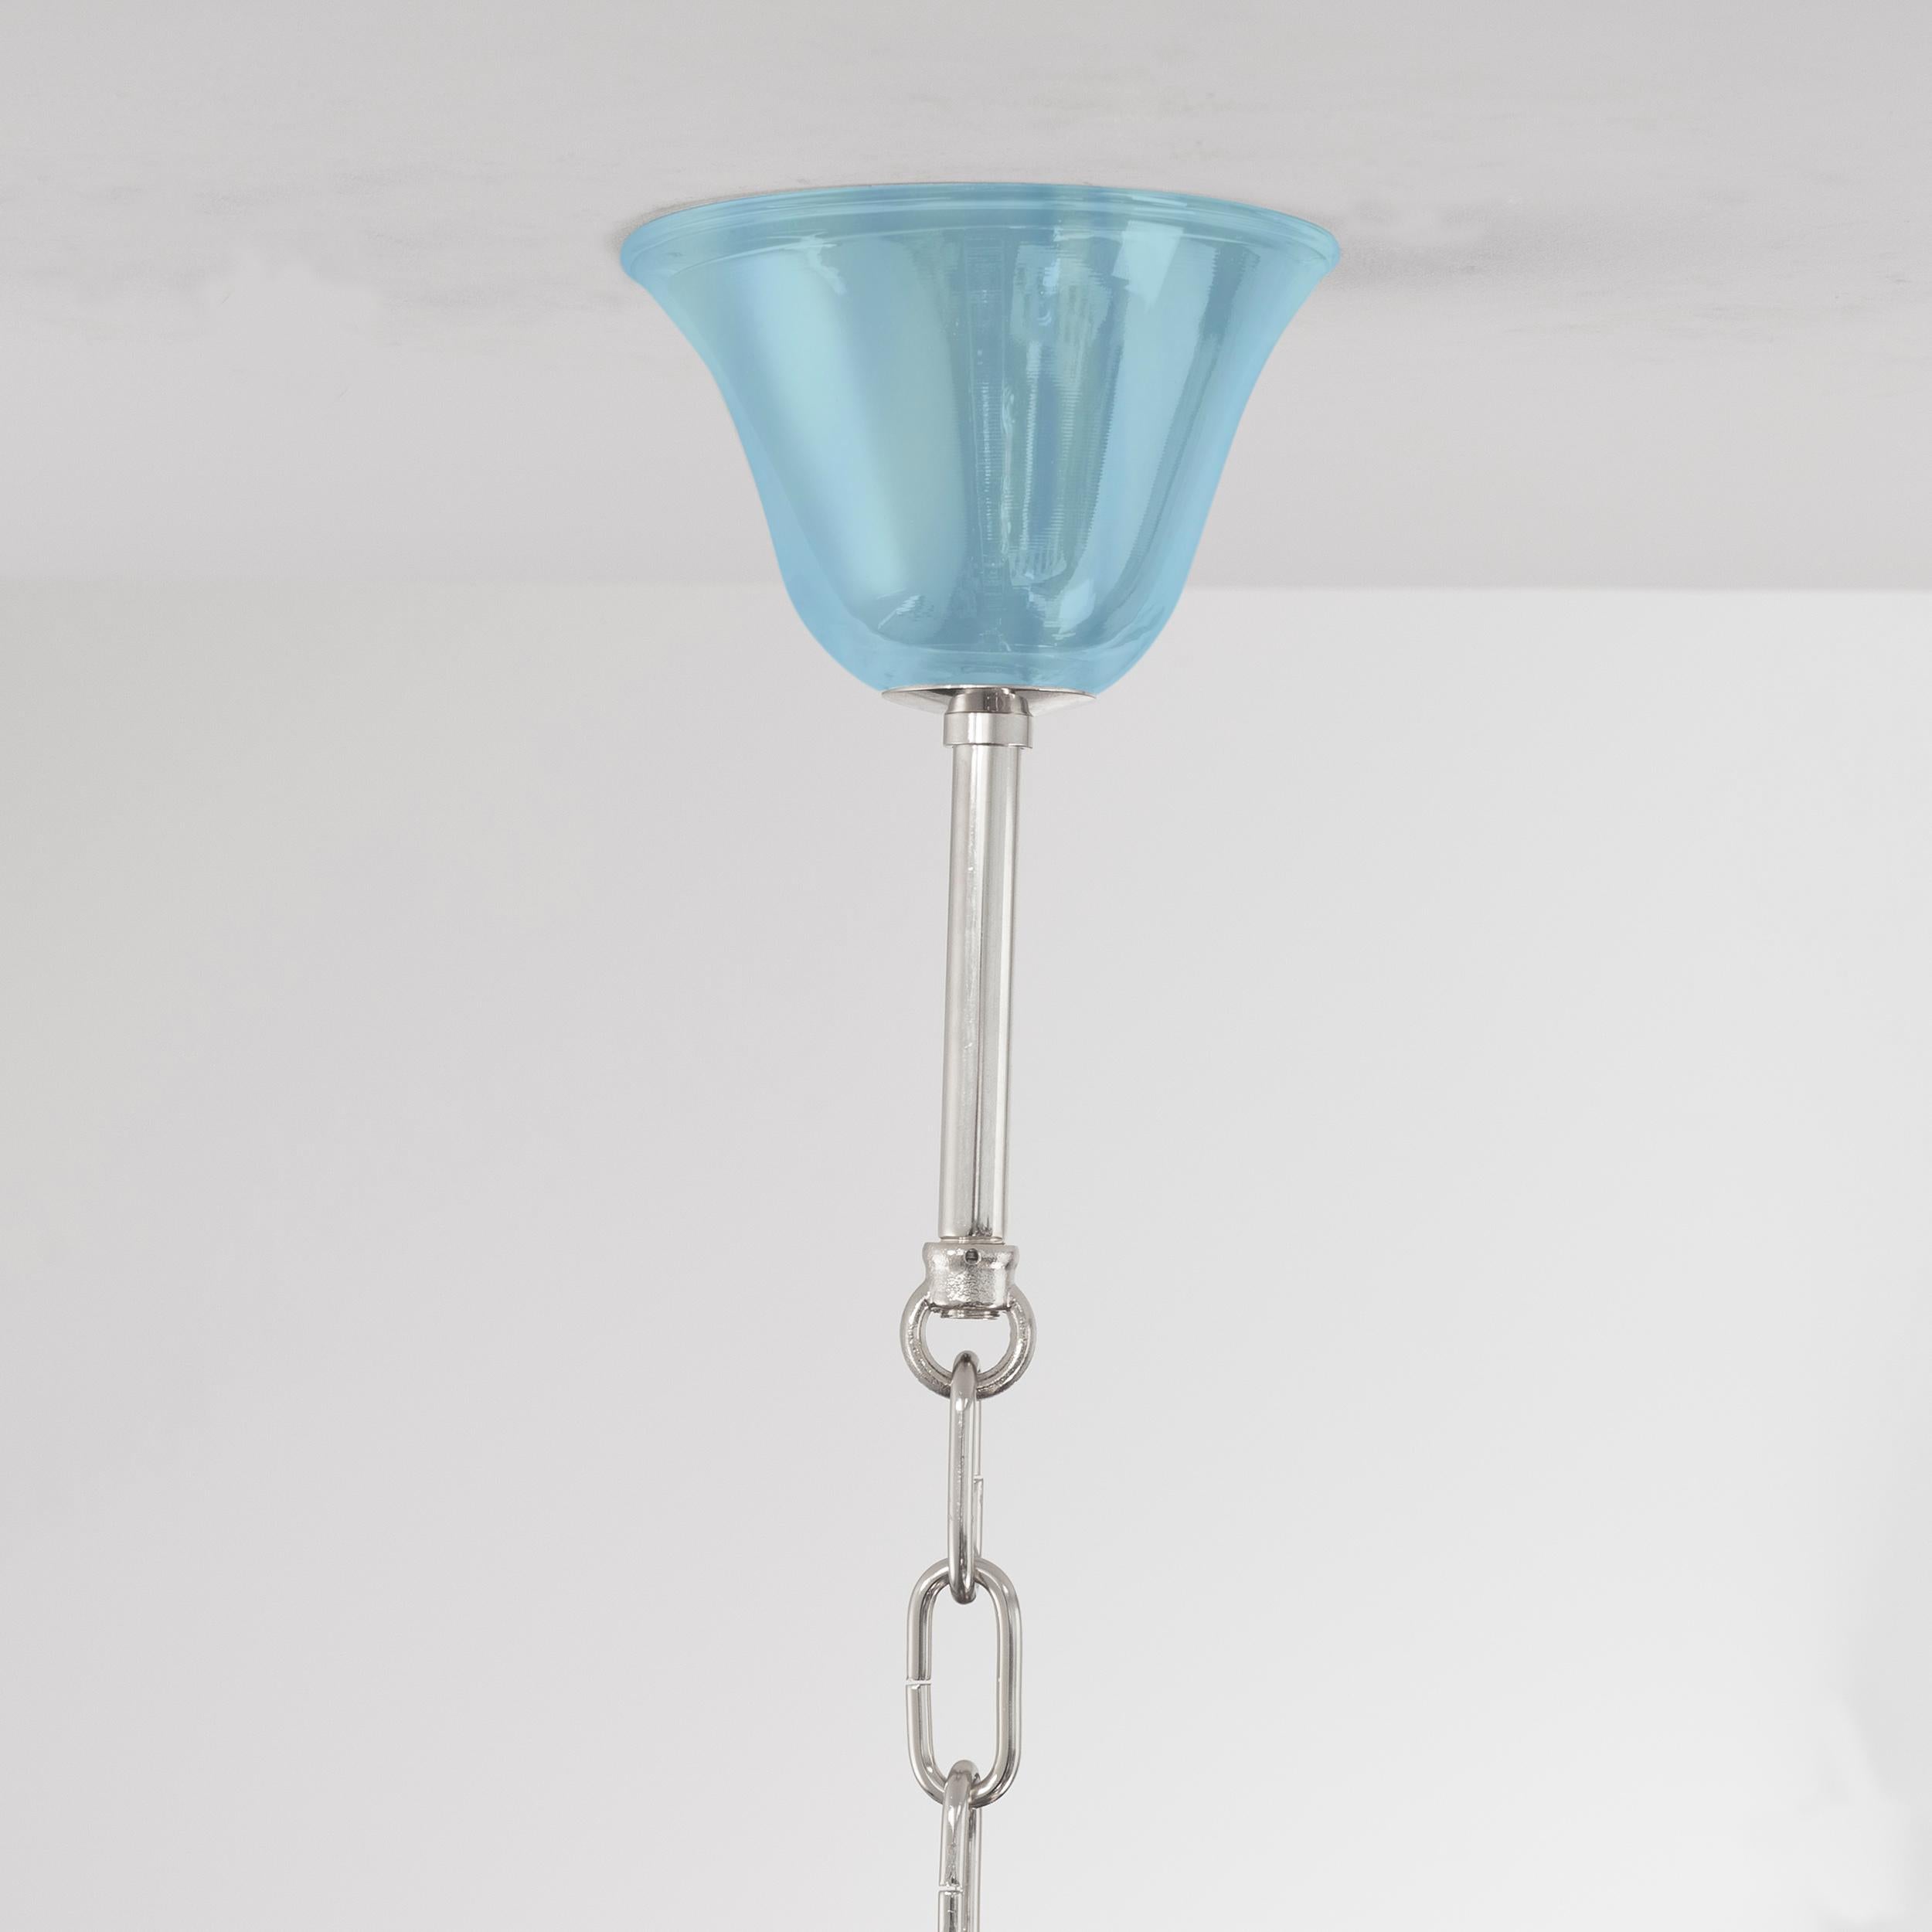 Blown Glass Italian Chandelier 5 arms Sky blue and clear Rostri Murano Glass by Multiforme For Sale